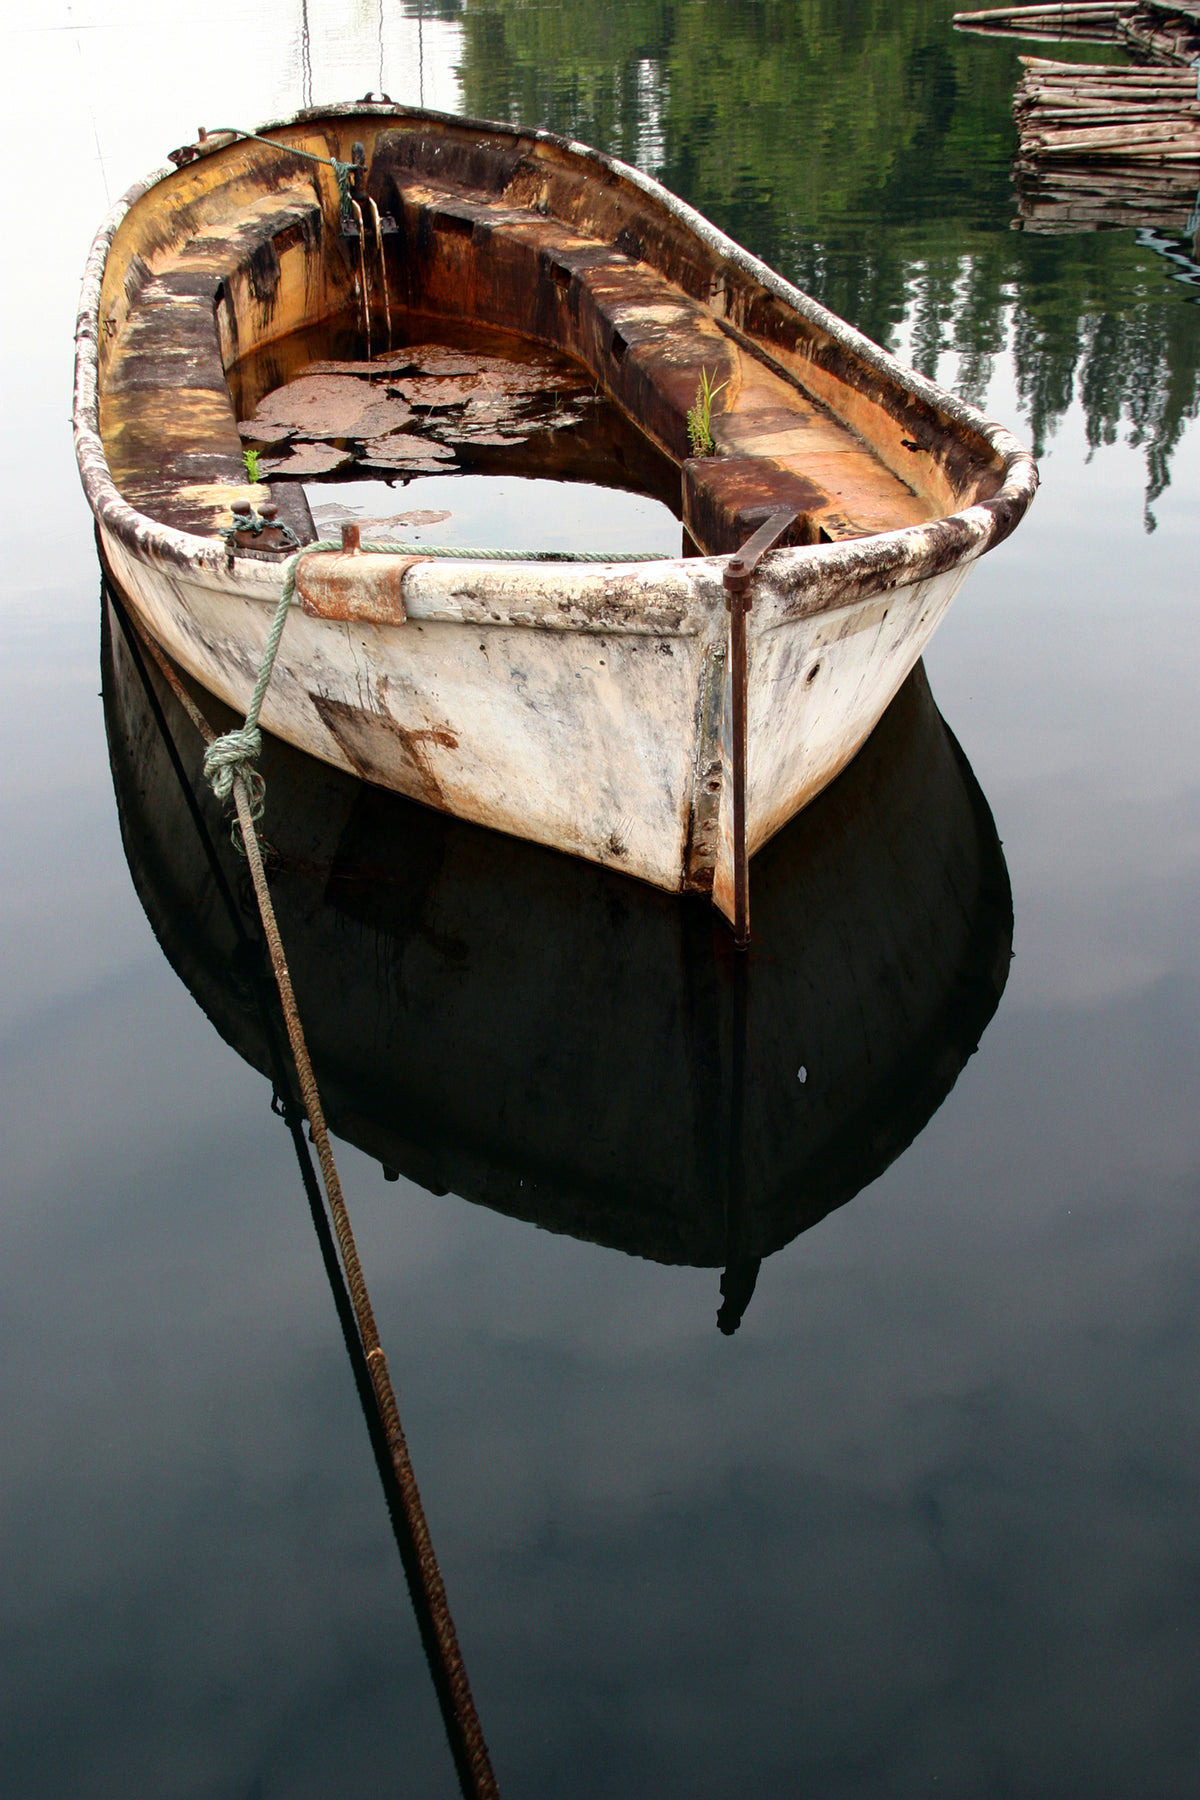 rusted river boat on clear water